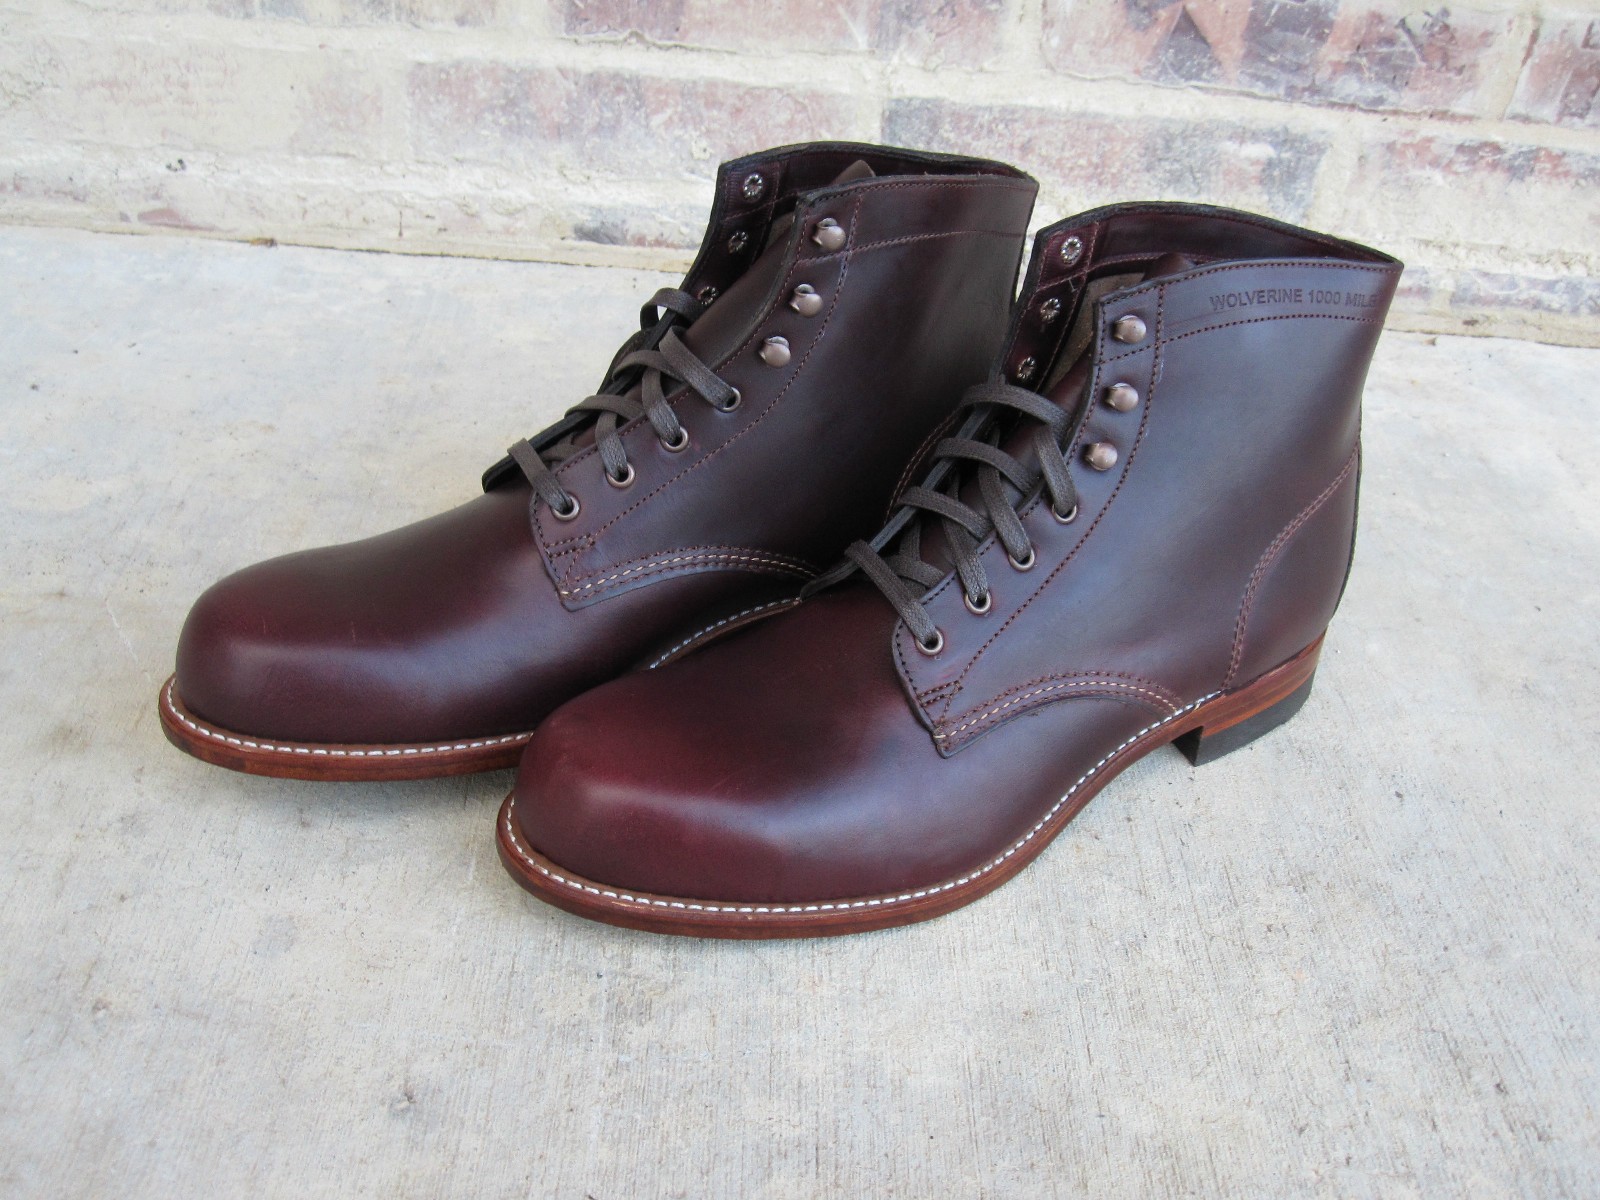 Wolverine 721LTD Shell Cordovan 1000 Mile Boot Review - Page 36